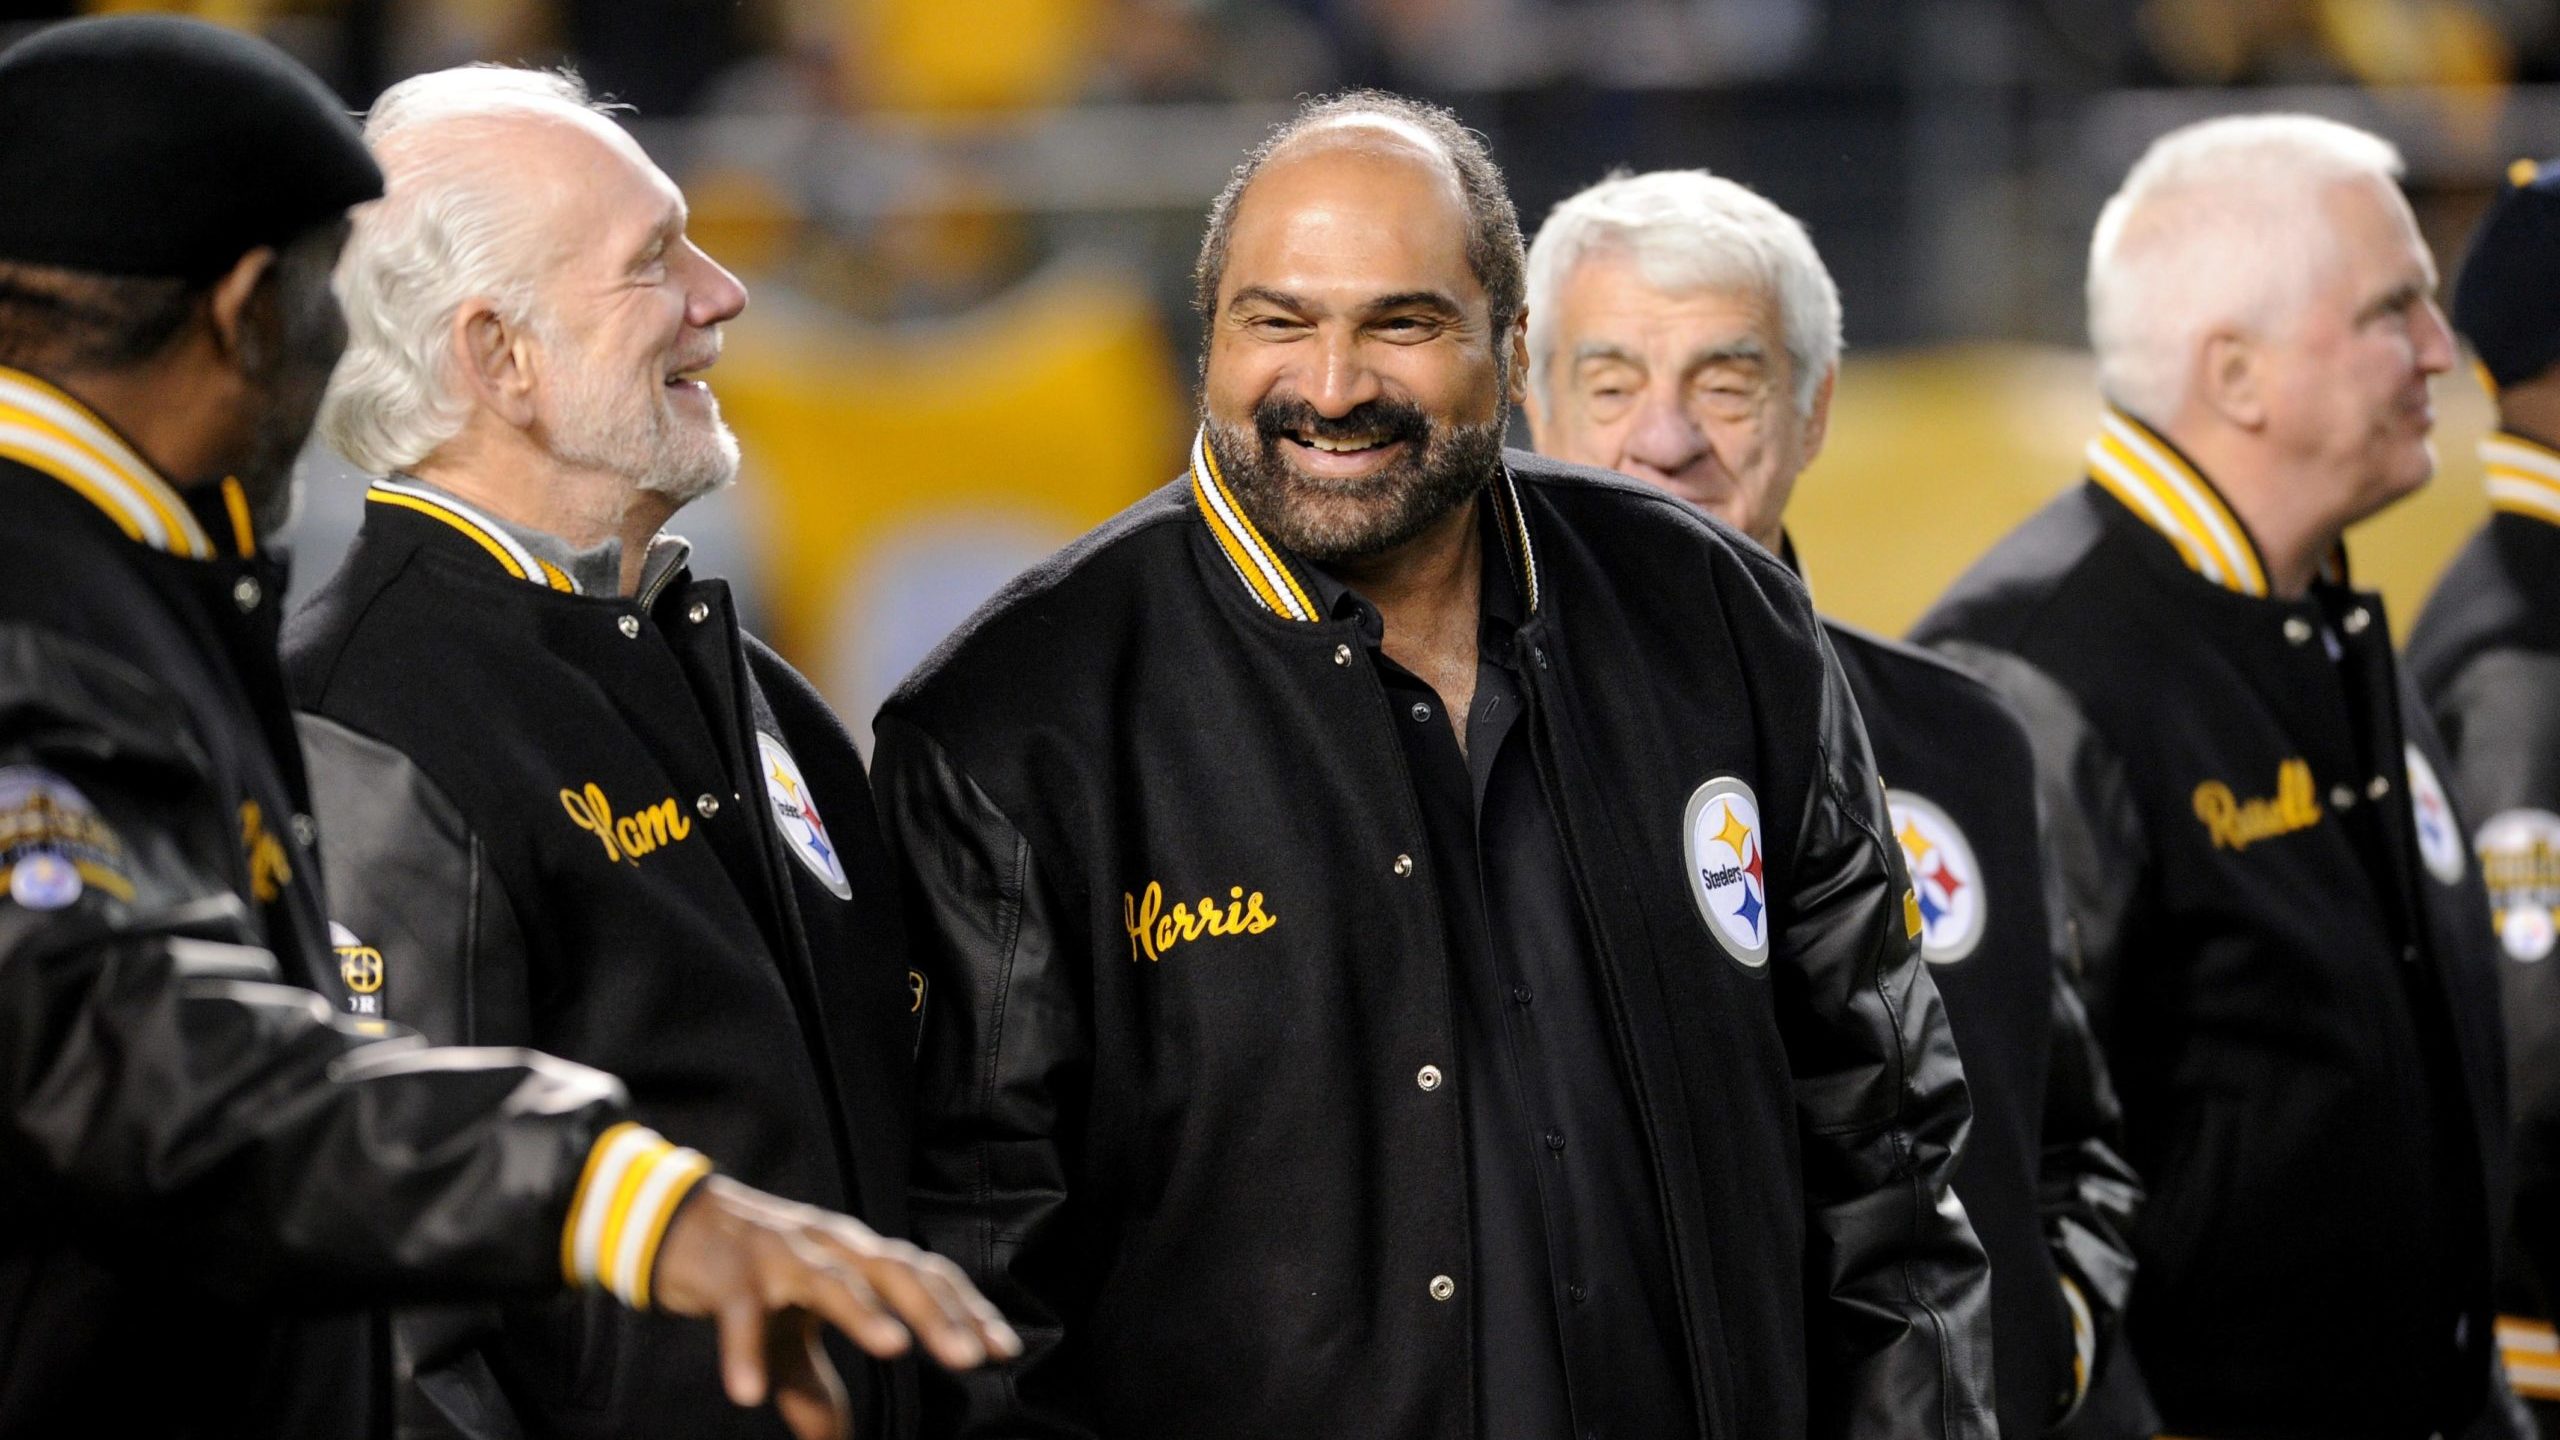 Tony Dungy: Franco Harris’ Impact on NFL, Pittsburgh Community, and My Life